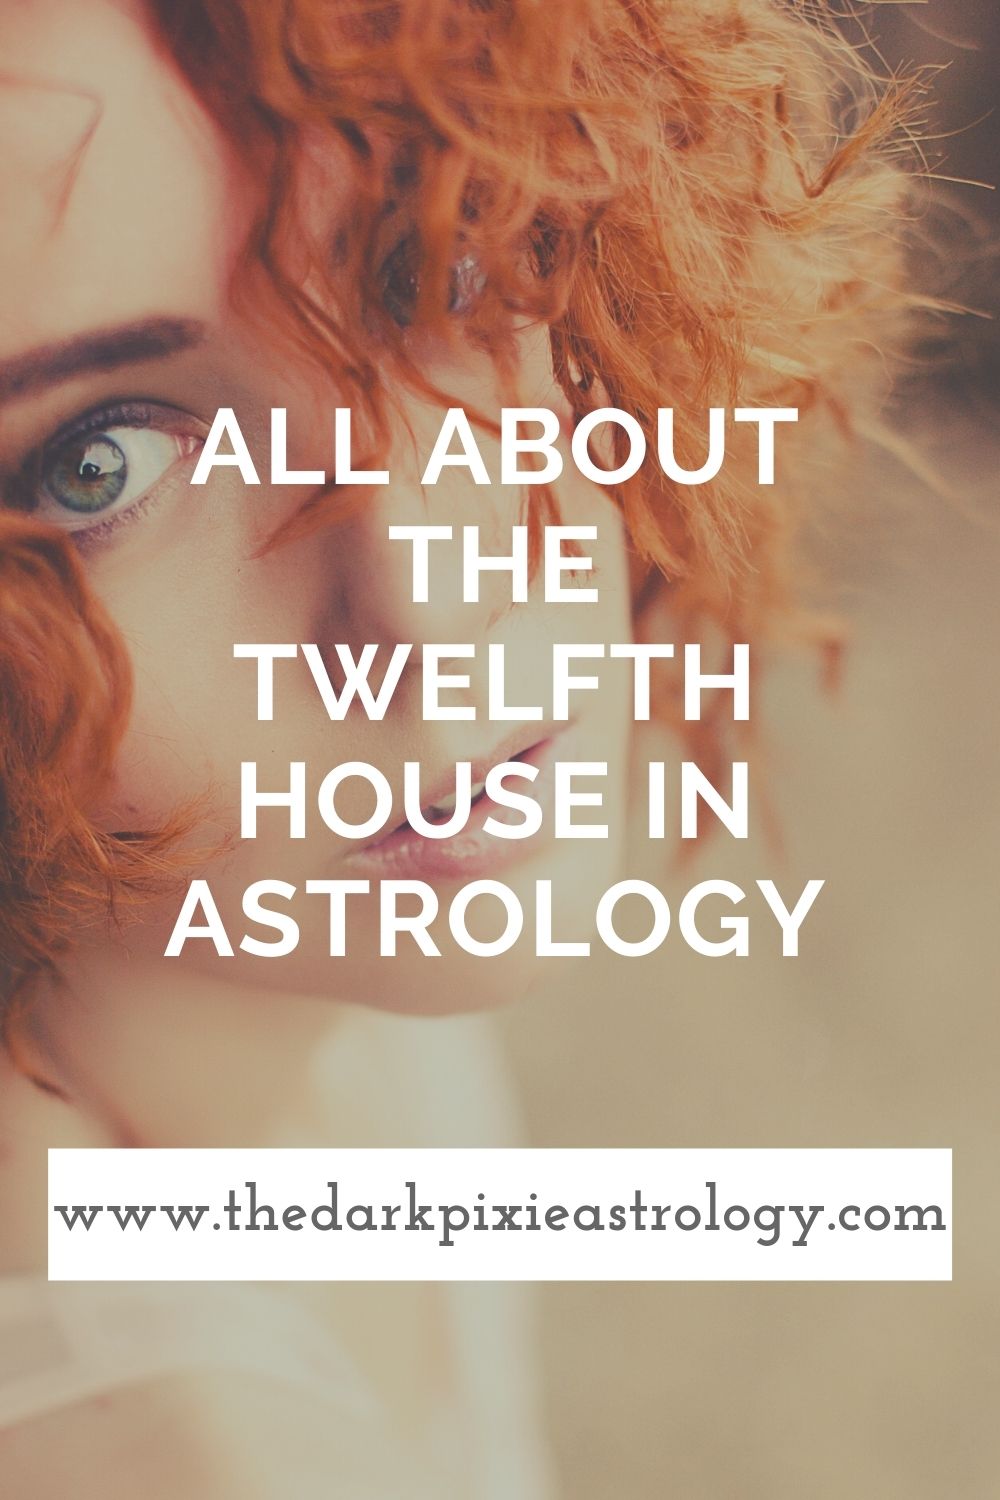 All About the Twelfth House in Astrology - The Dark Pixie Astrology